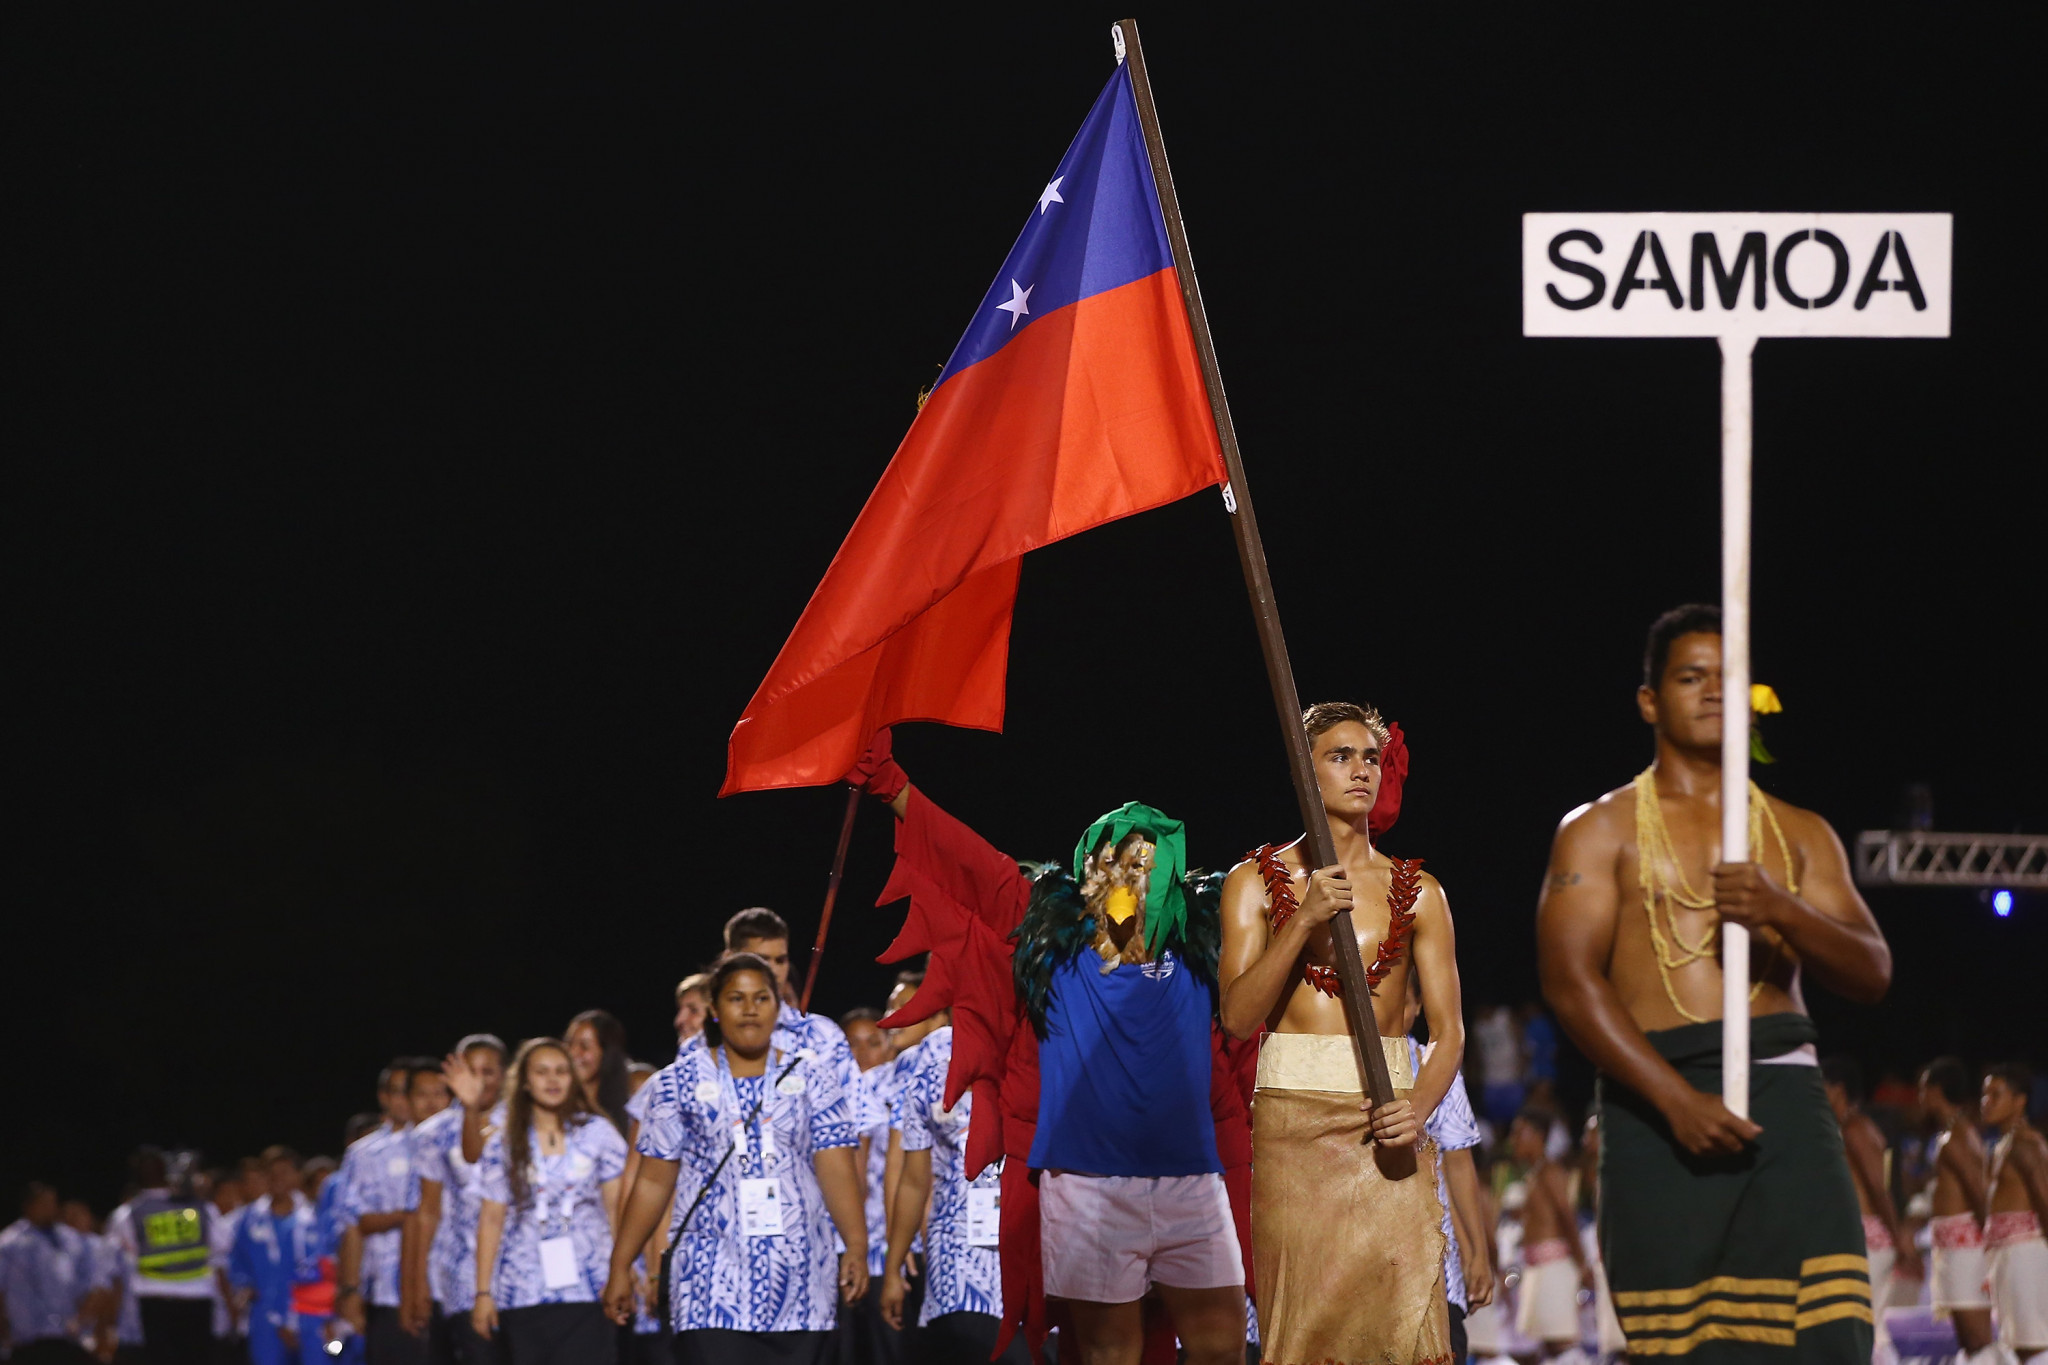 SASNOC expecting medal from every sport Samoa compete in at Gold Coast 2018